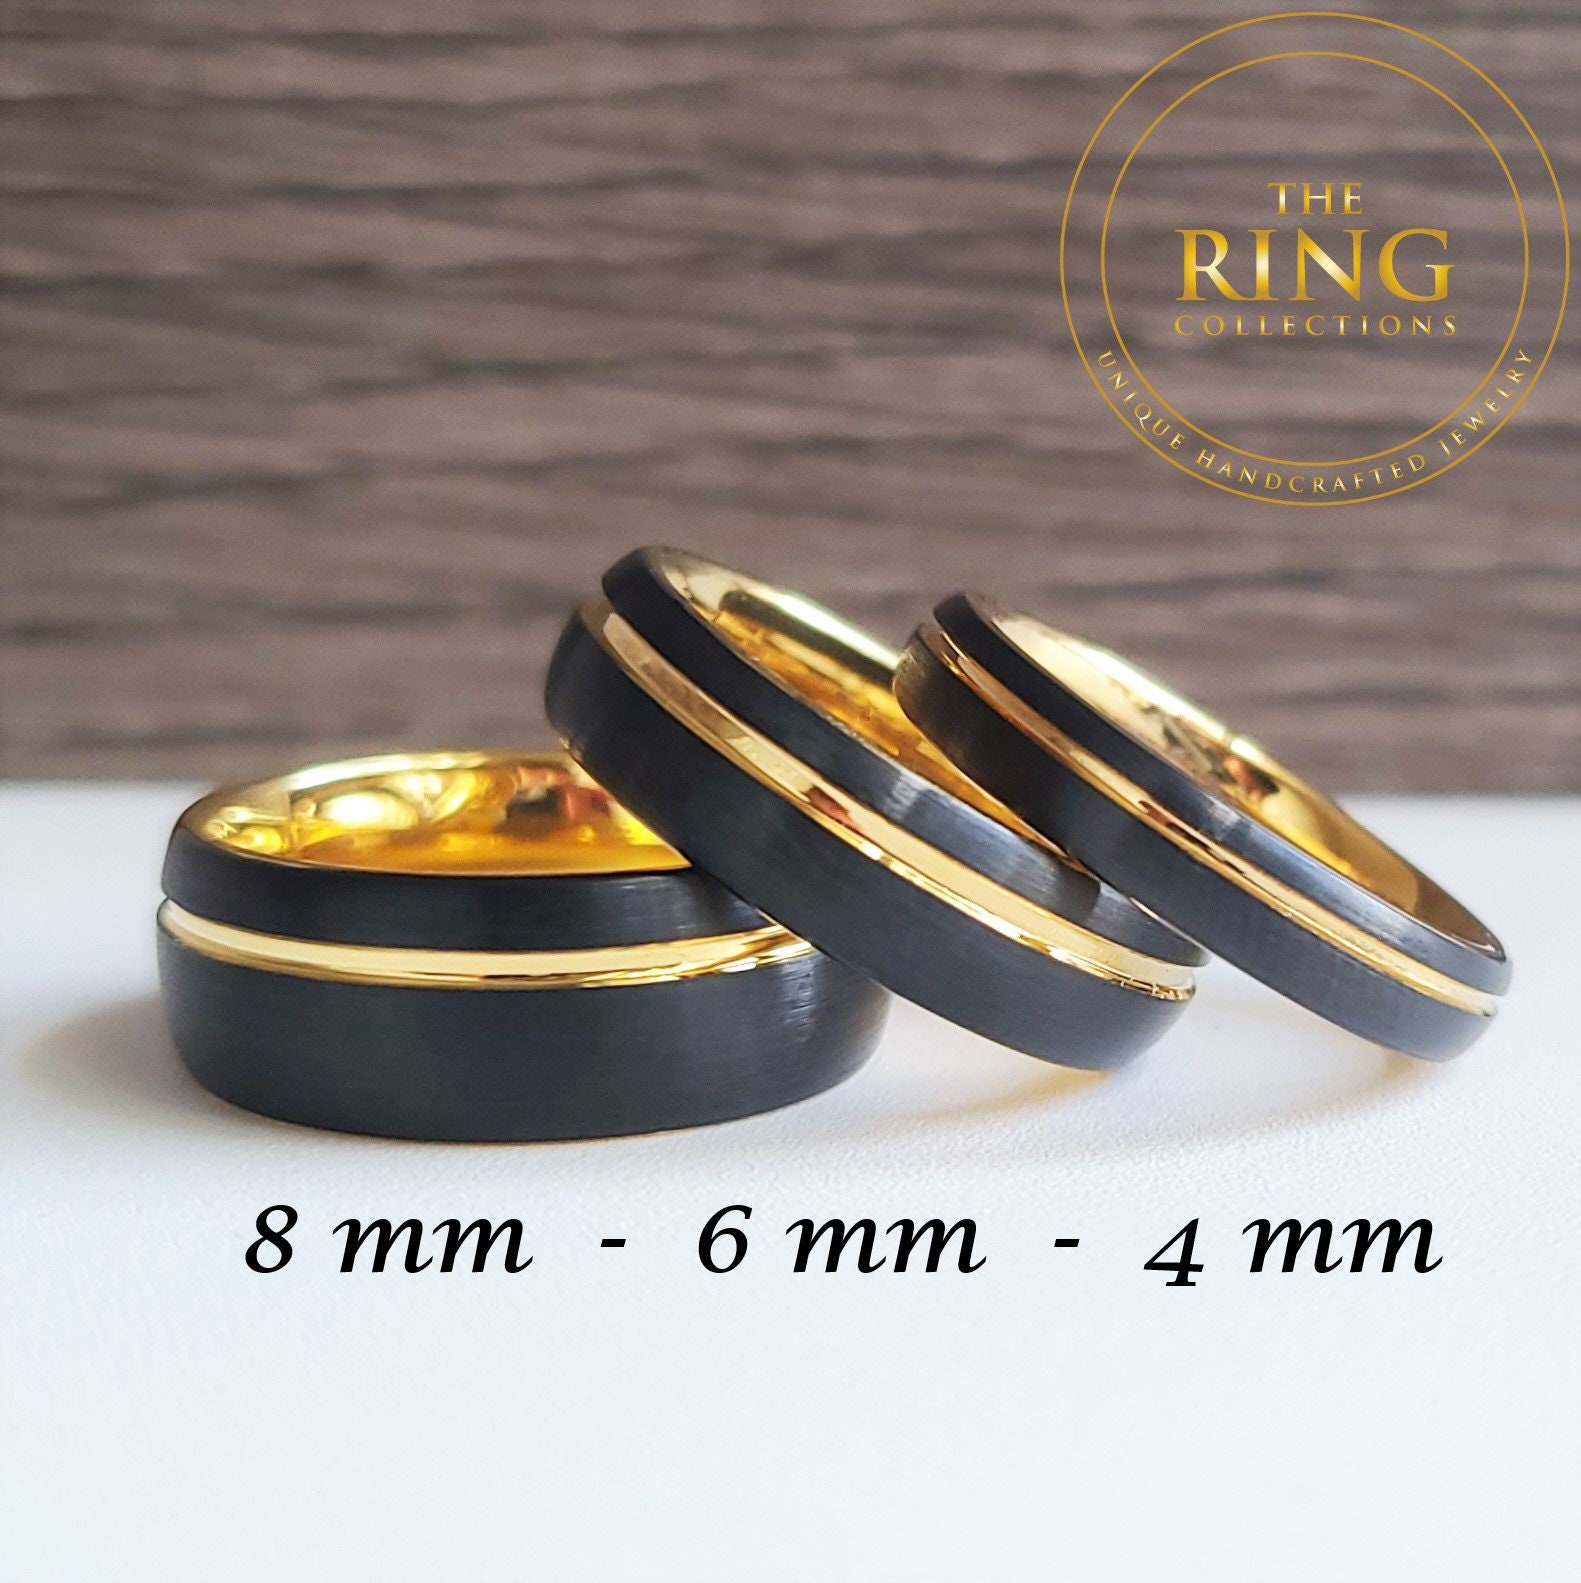 Black Titanium Couple's Wedding Ring Set with Dual Grooves